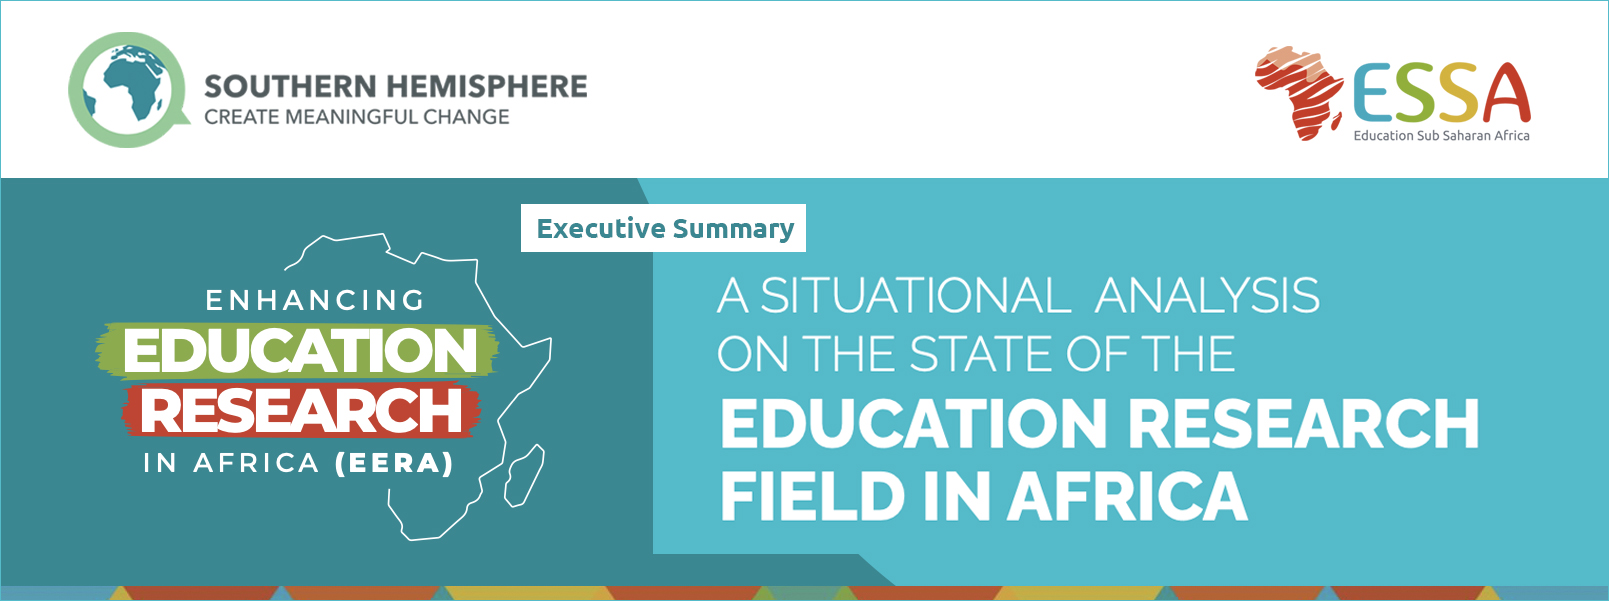 Executive Summary: A Situational Analysis on the State of the Education Research Field in Africa